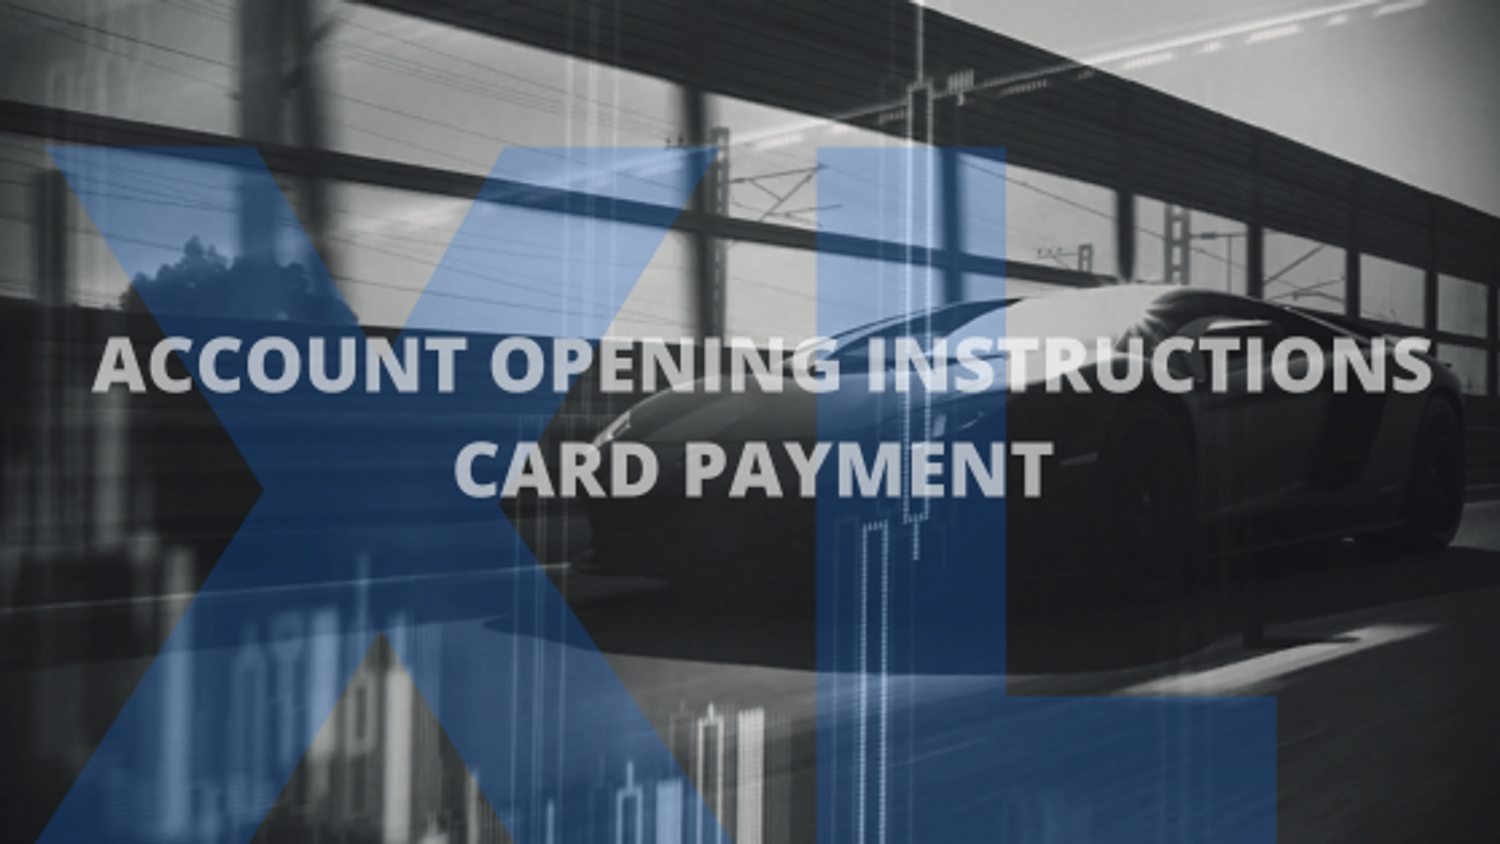 AMA - ACCOUNT OPENING - CARD PAYMENT